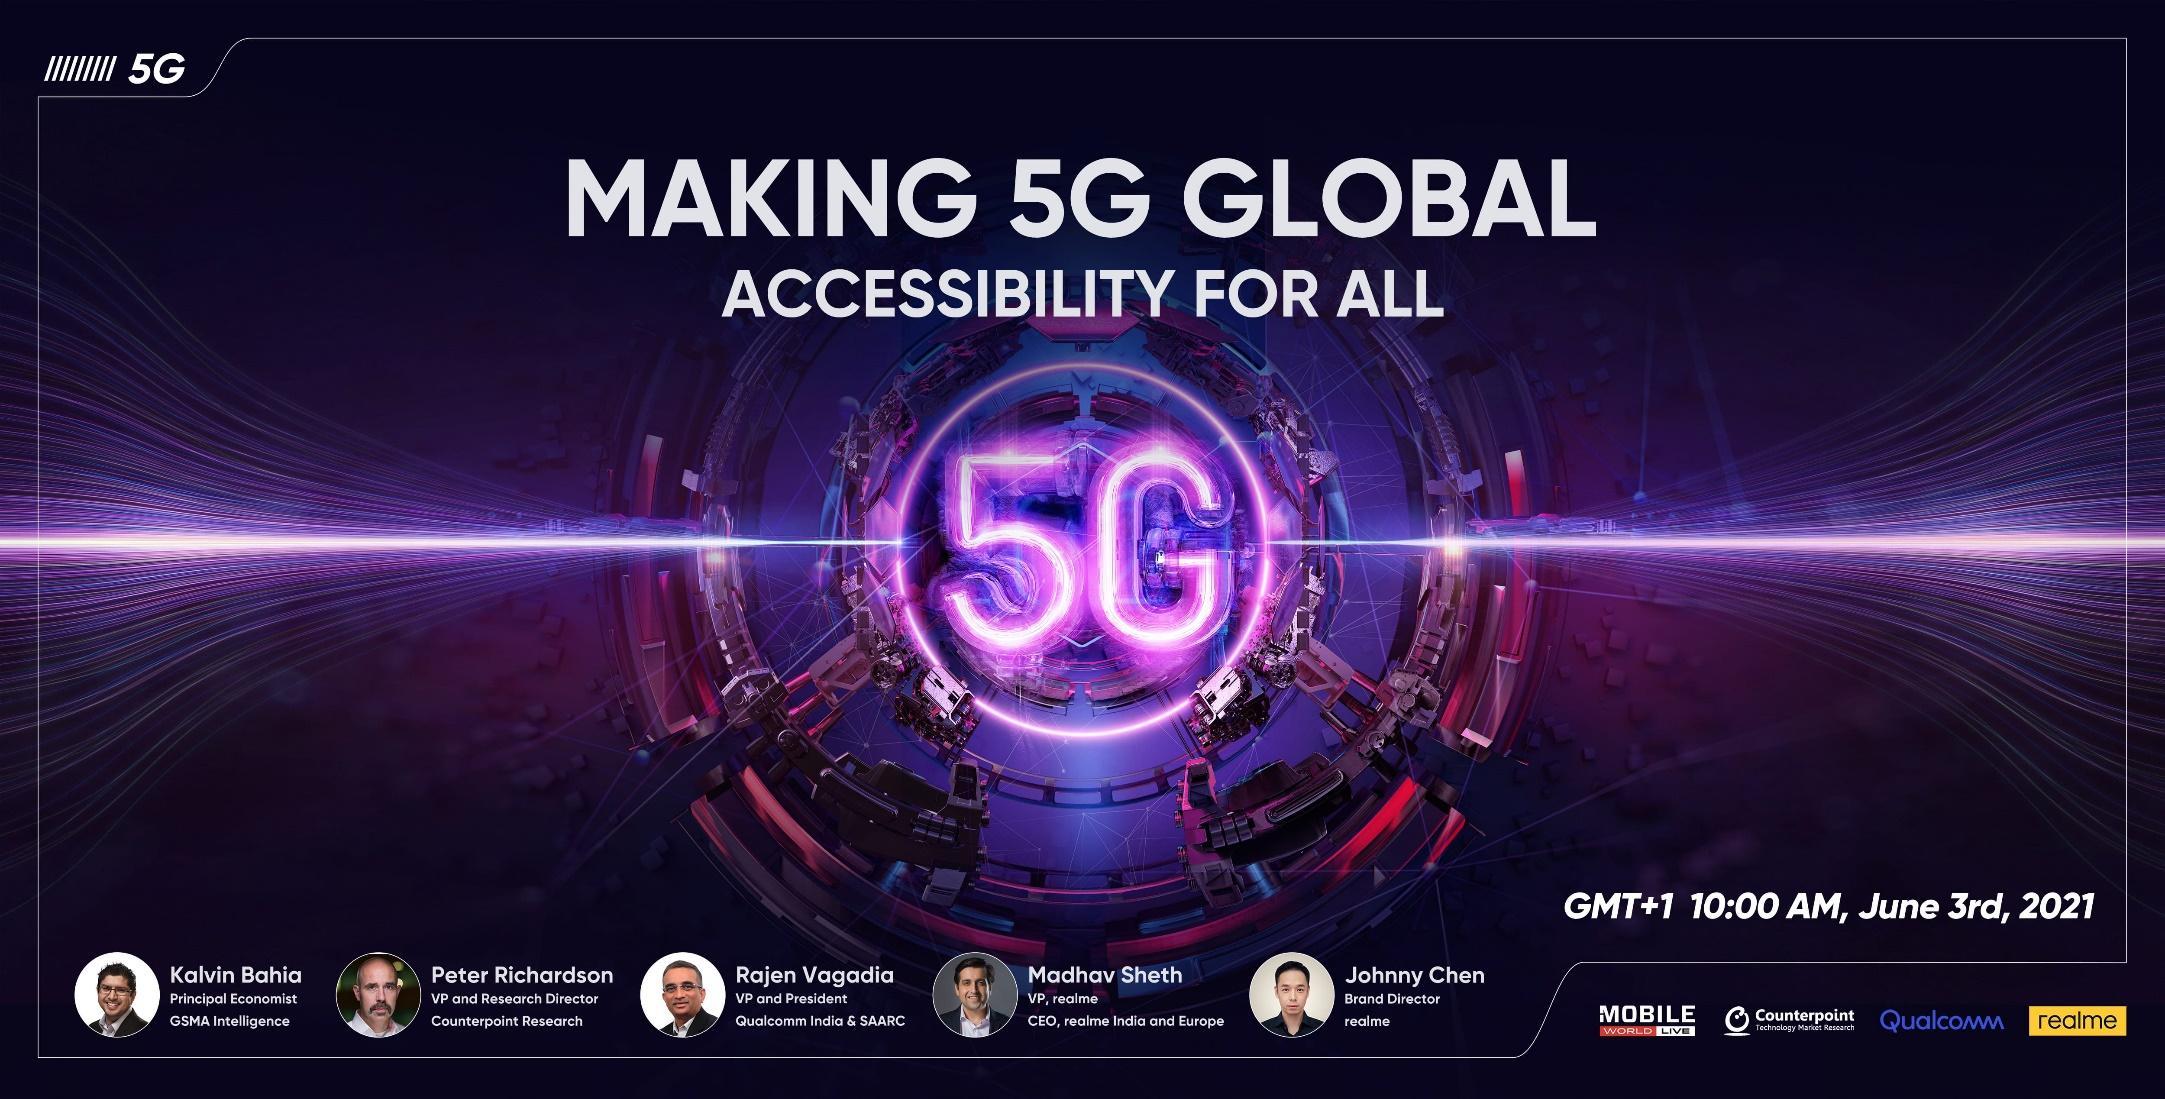 realme 5G Summit Ends with a Commitment to Bring 5G Phones to 100 Million Young Consumers in Next Three Years